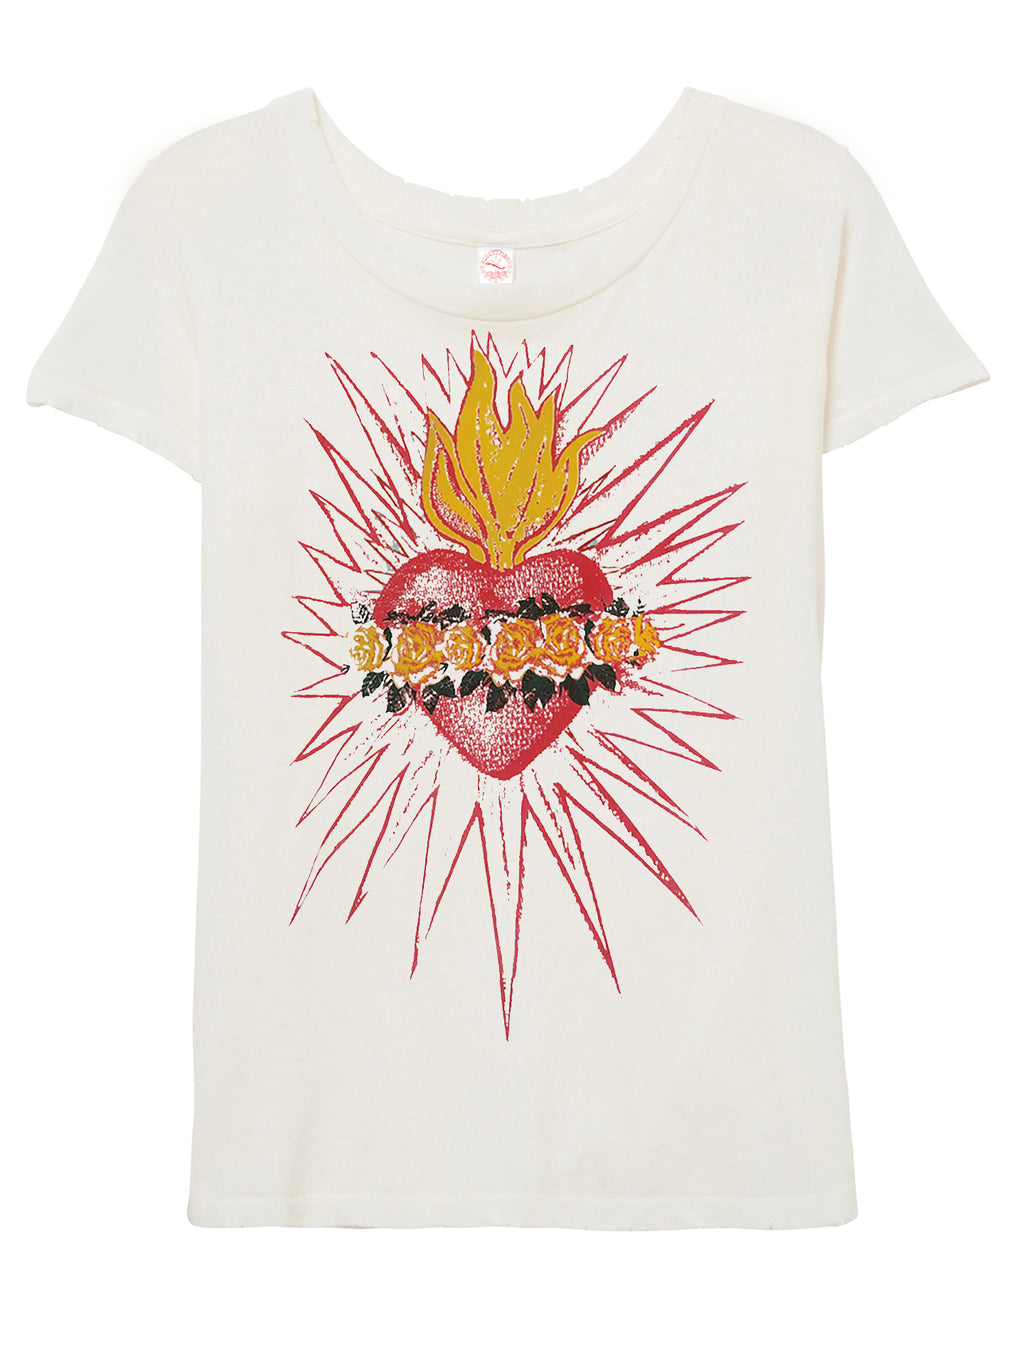 Sacred Heart "destroyed" Tee.